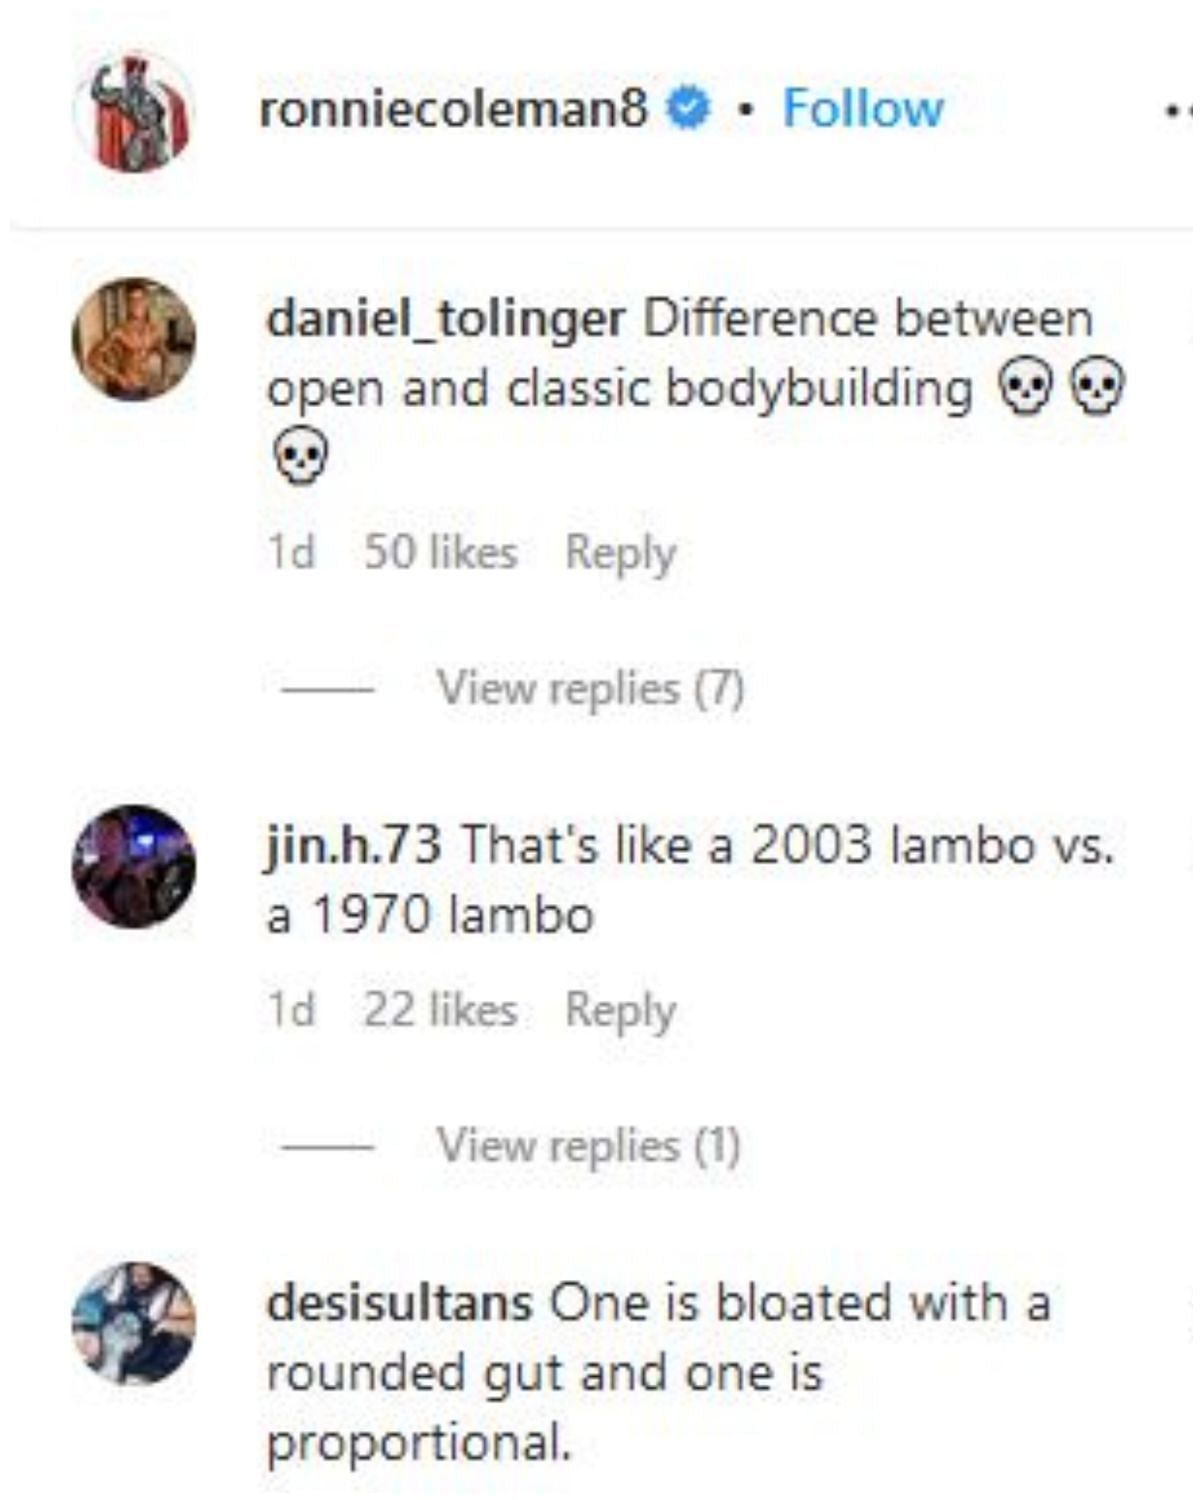 Screengrab of Coleman&#039;s Instagram comment section